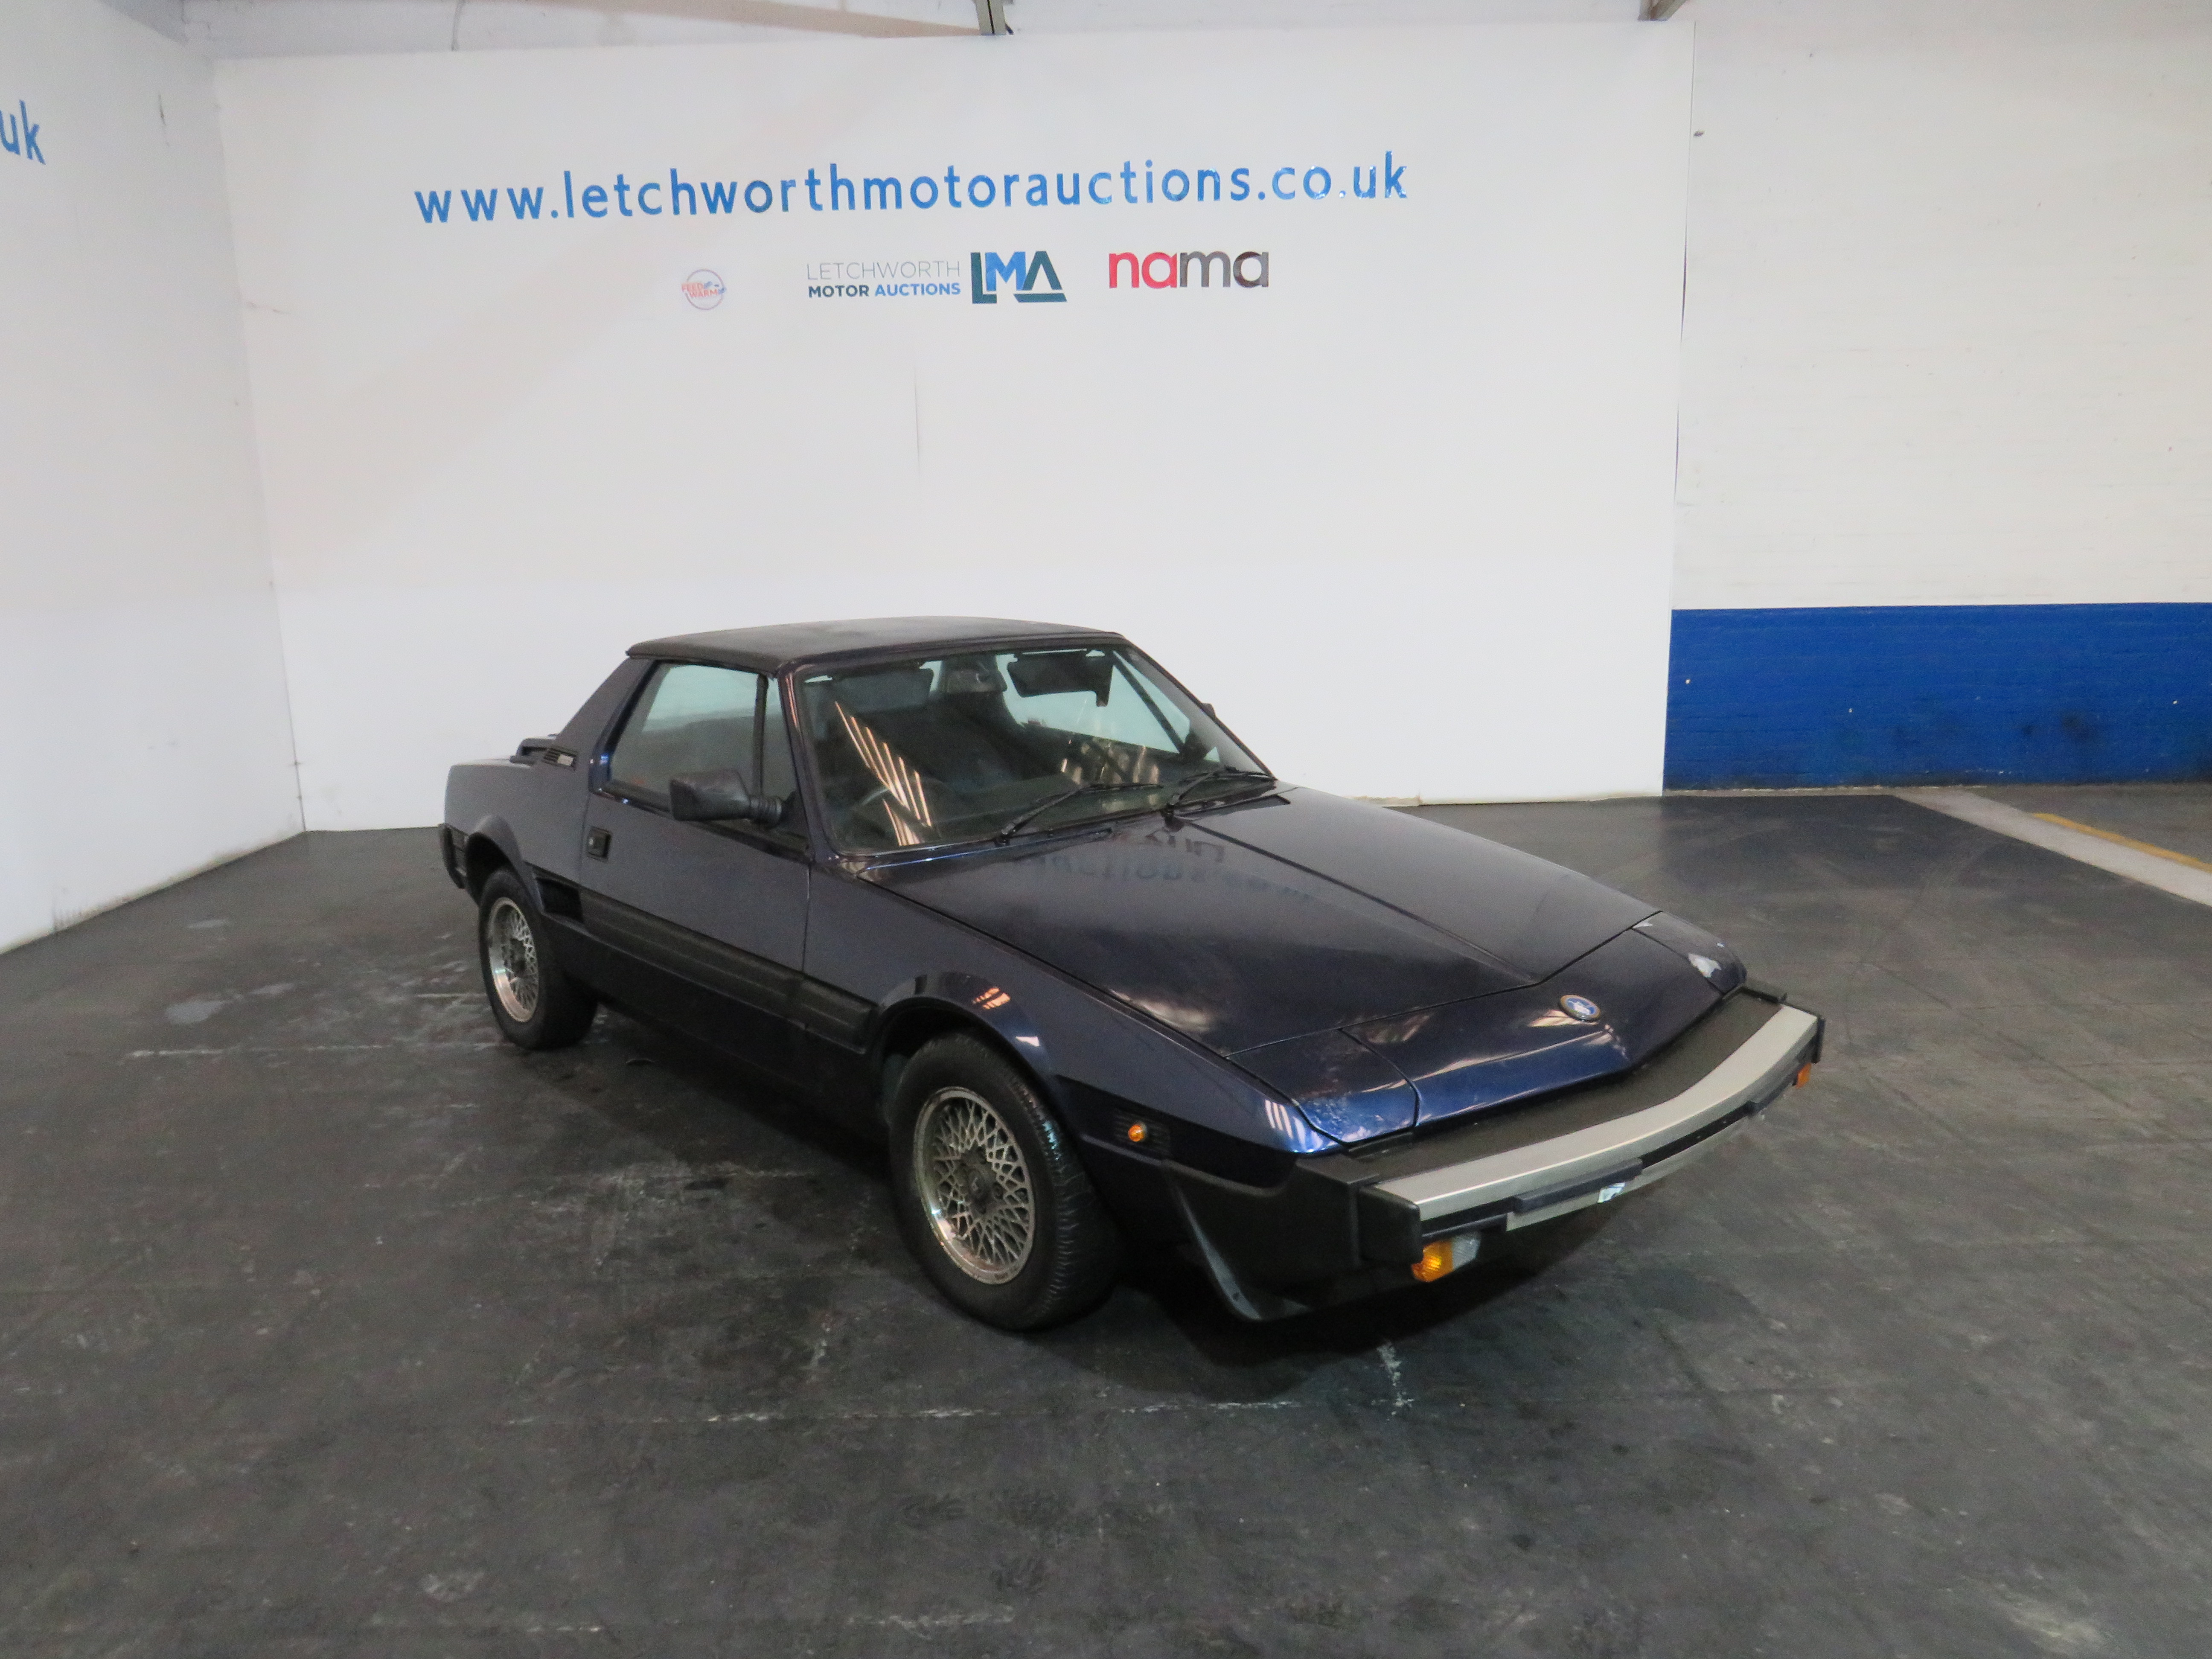 1989 Fiat X1/9 Gran Finale - 1498cc - ONE OWNER FROM NEW